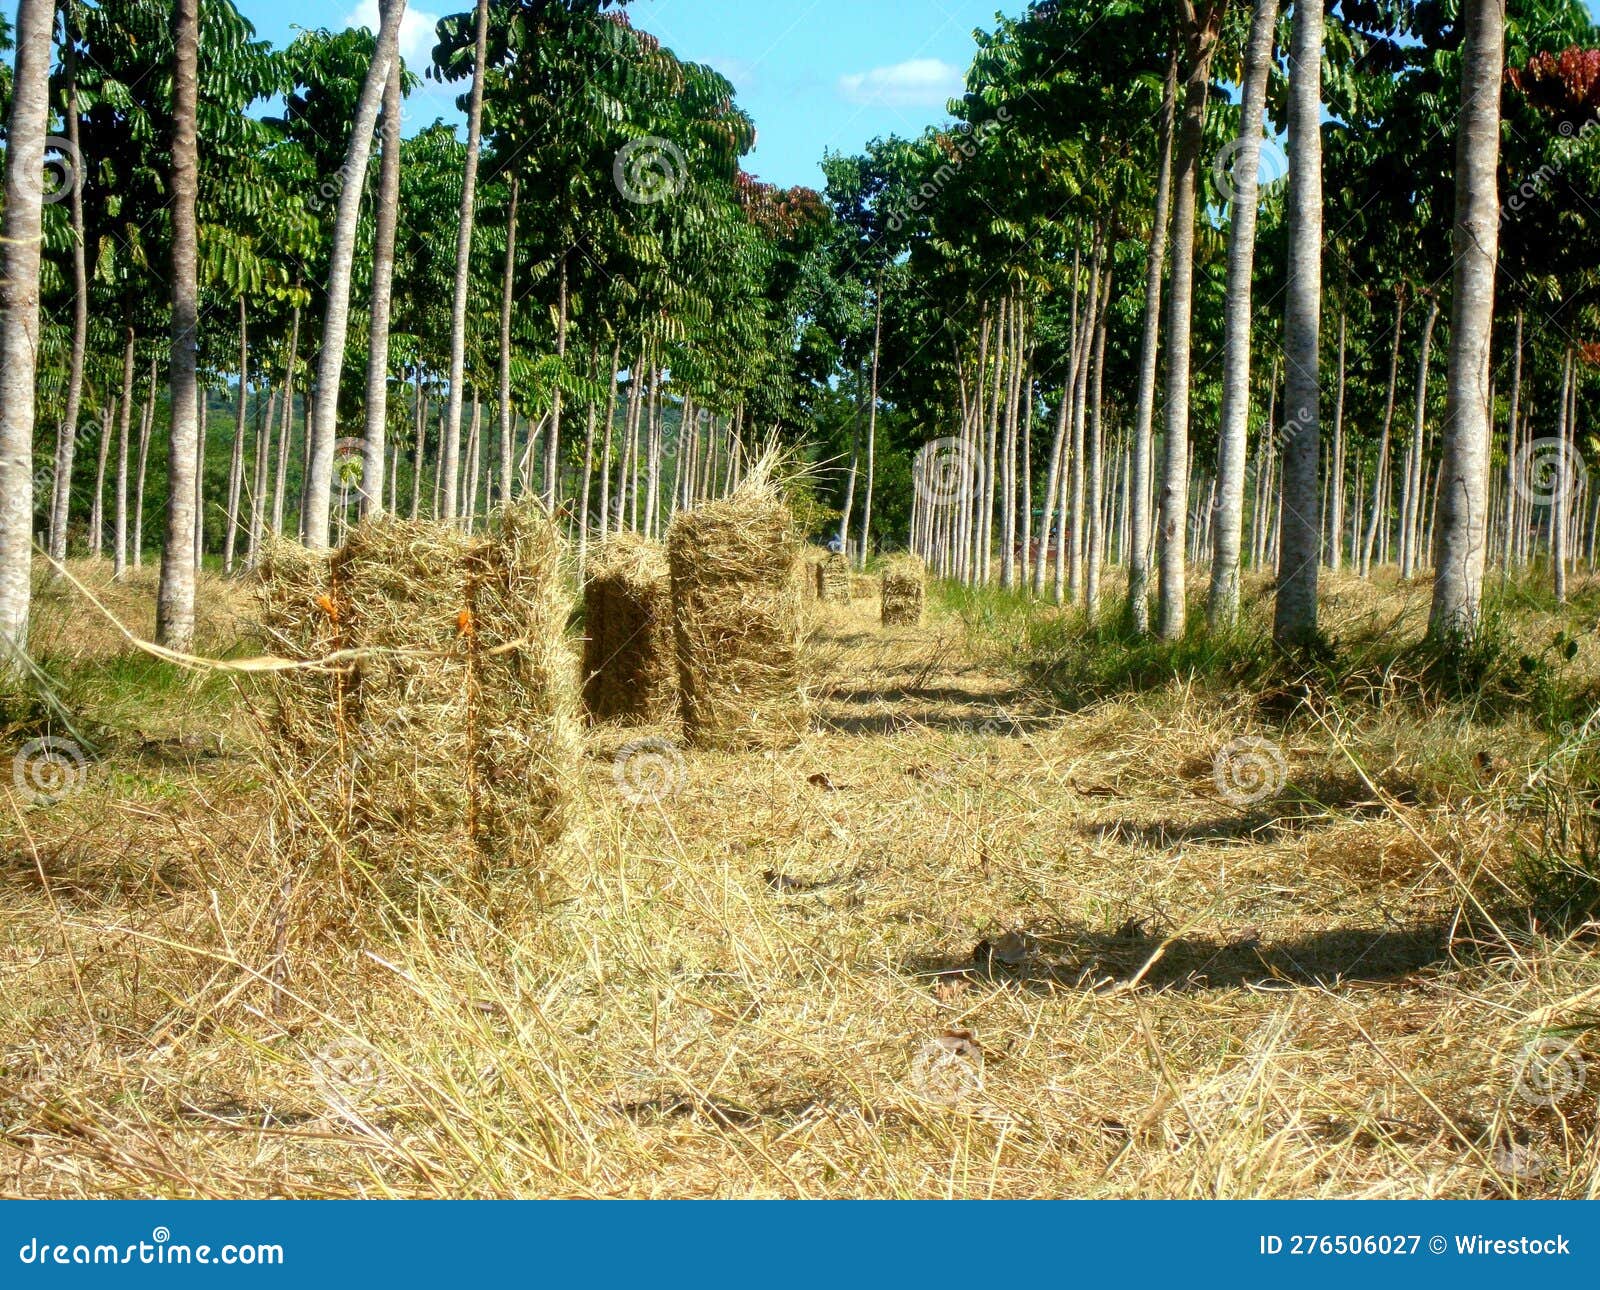 reforestation in consortium with hay production